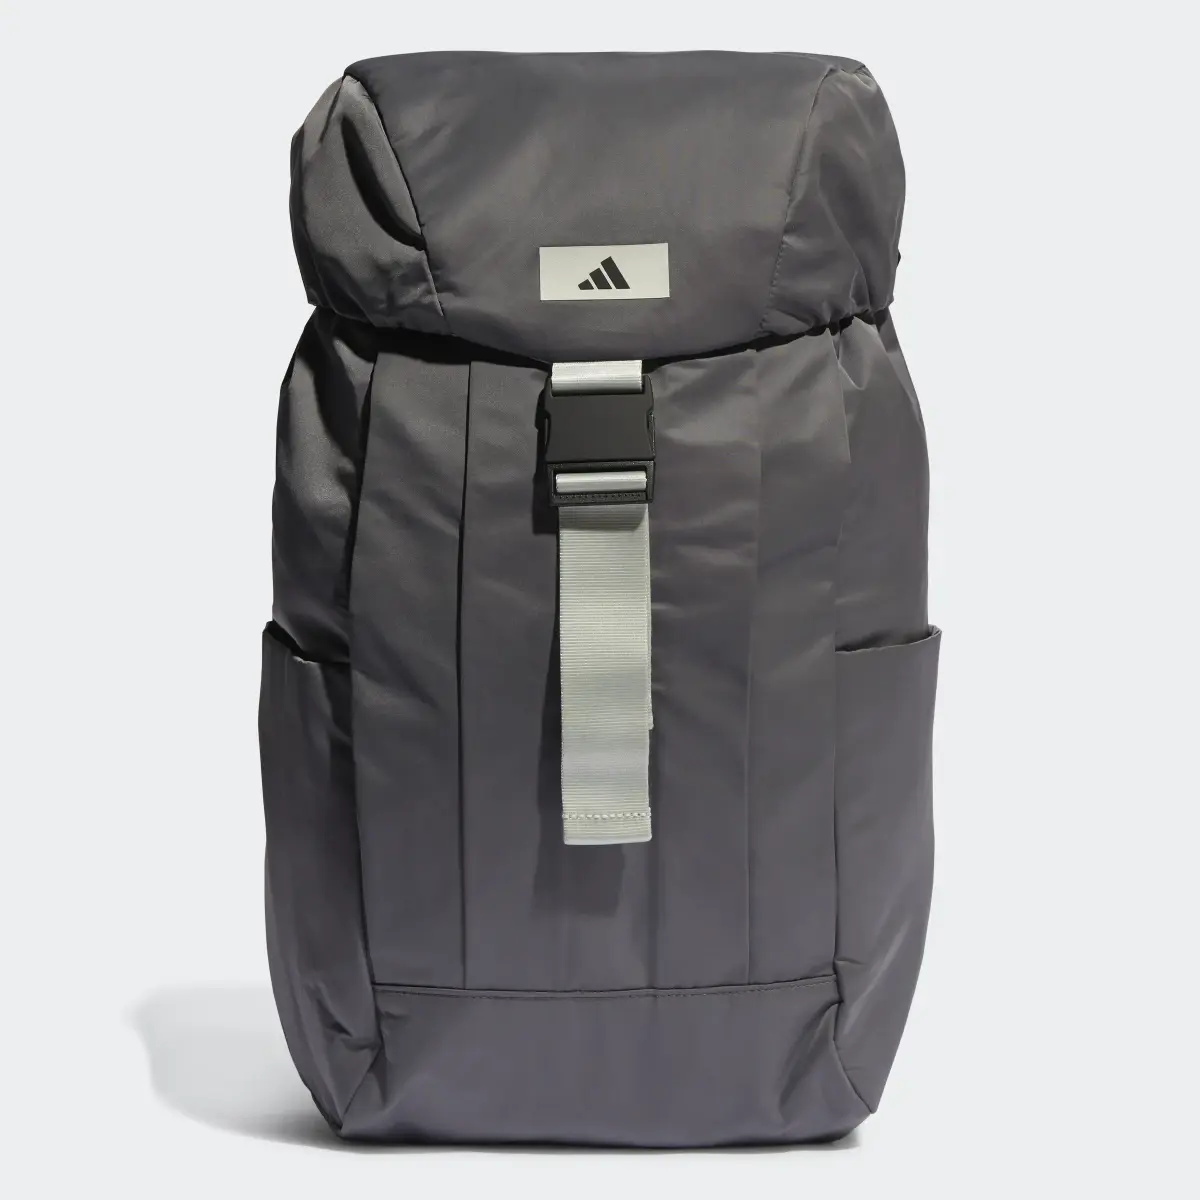 Adidas Gym High-Intensity Backpack. 1